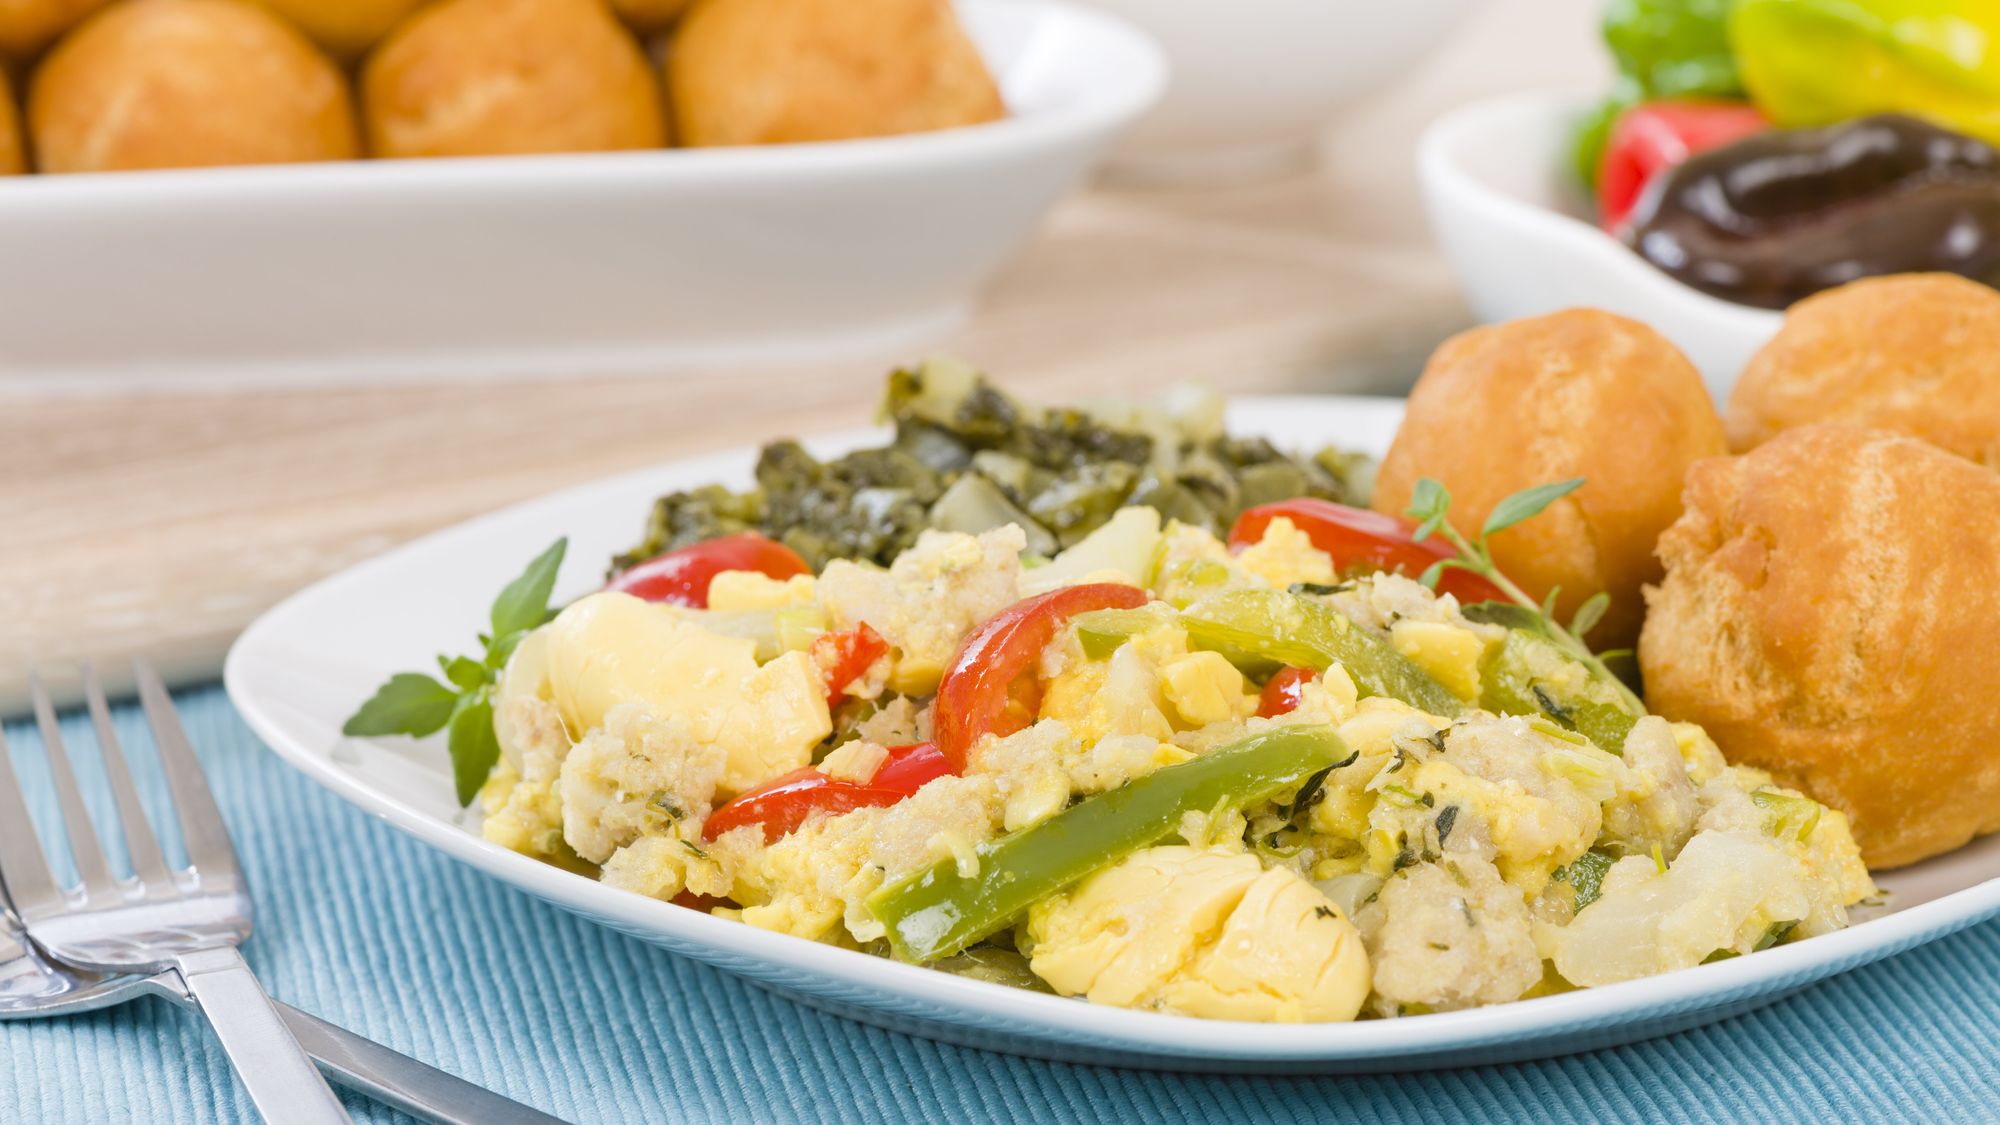 Best Recipe To Make Ackee and Saltfish